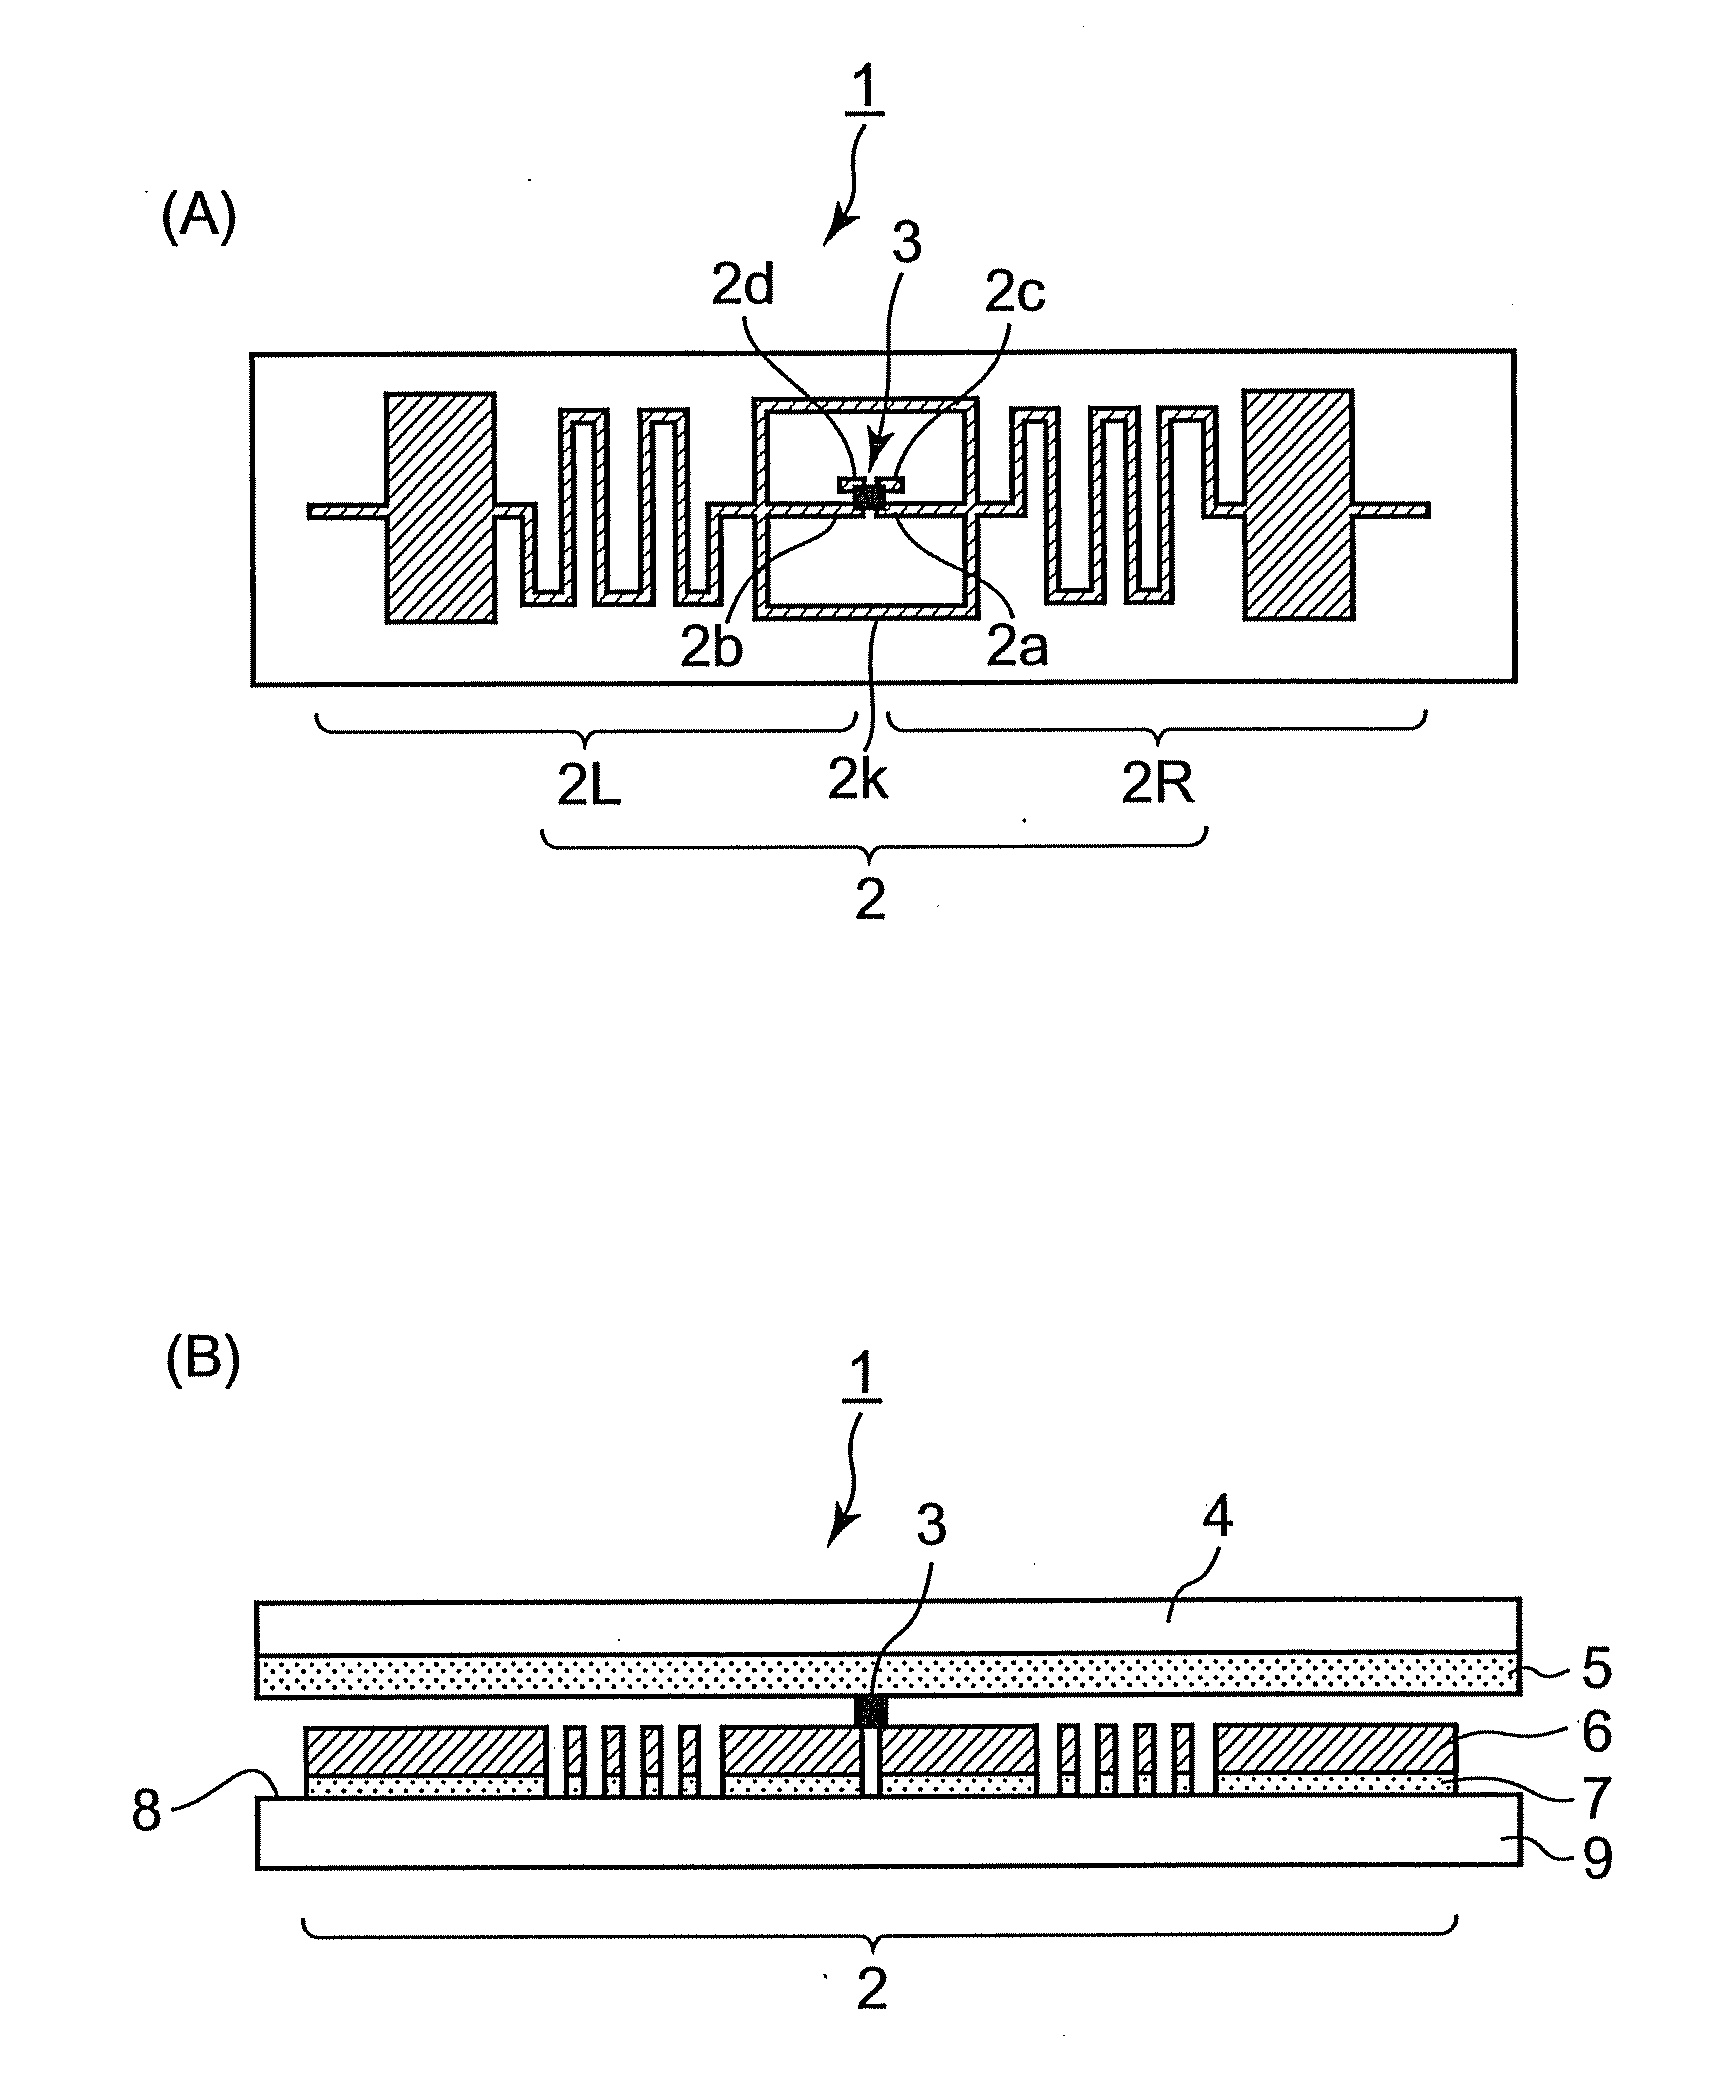 Noncontact IC tag label and method of manufacturing the same